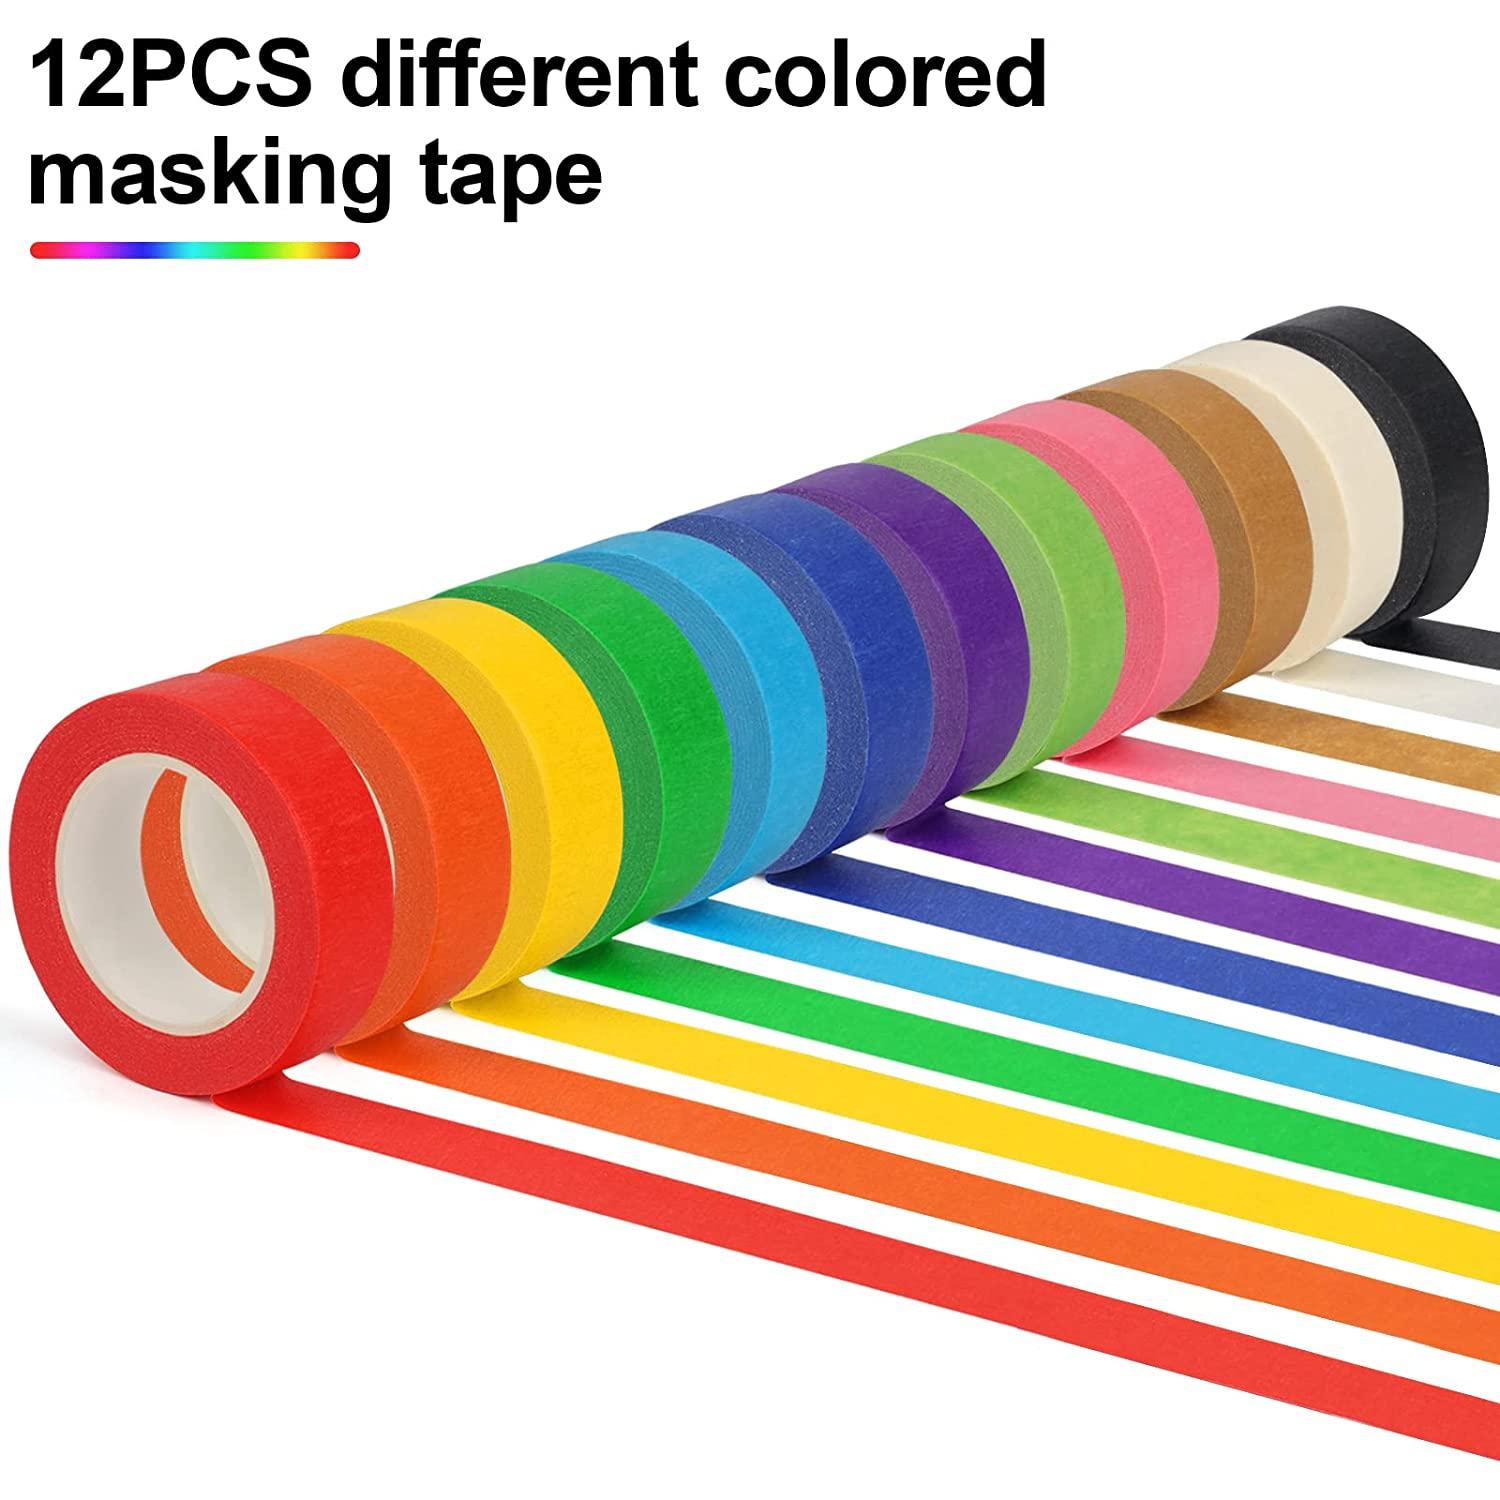 Guirnd 12PCS Colored Masking Tape, Kids Art Supplies Colored Tape, DIY  Craft Tape, Colored Tape Rolls, Colored Painters Tape 1.7cm X 12m (2/3In X  13Yards)